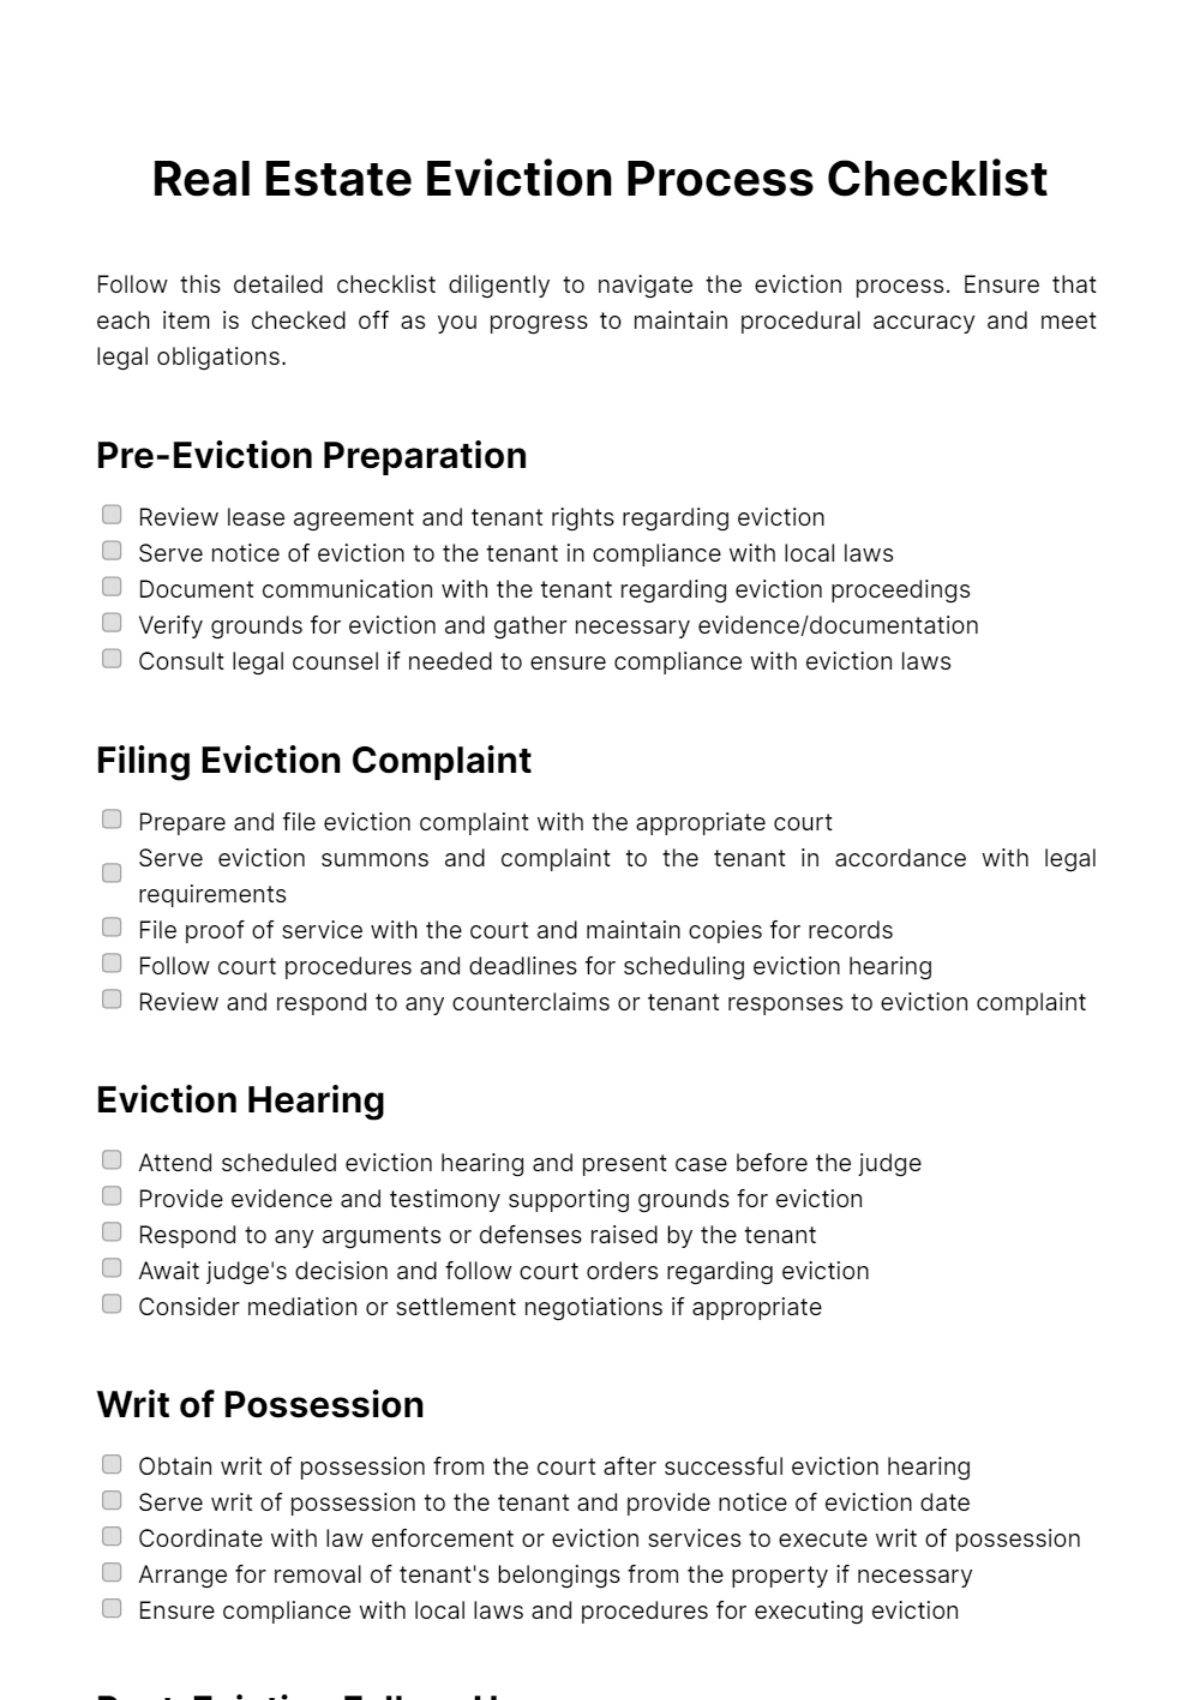 Real Estate Eviction Process Checklist Template